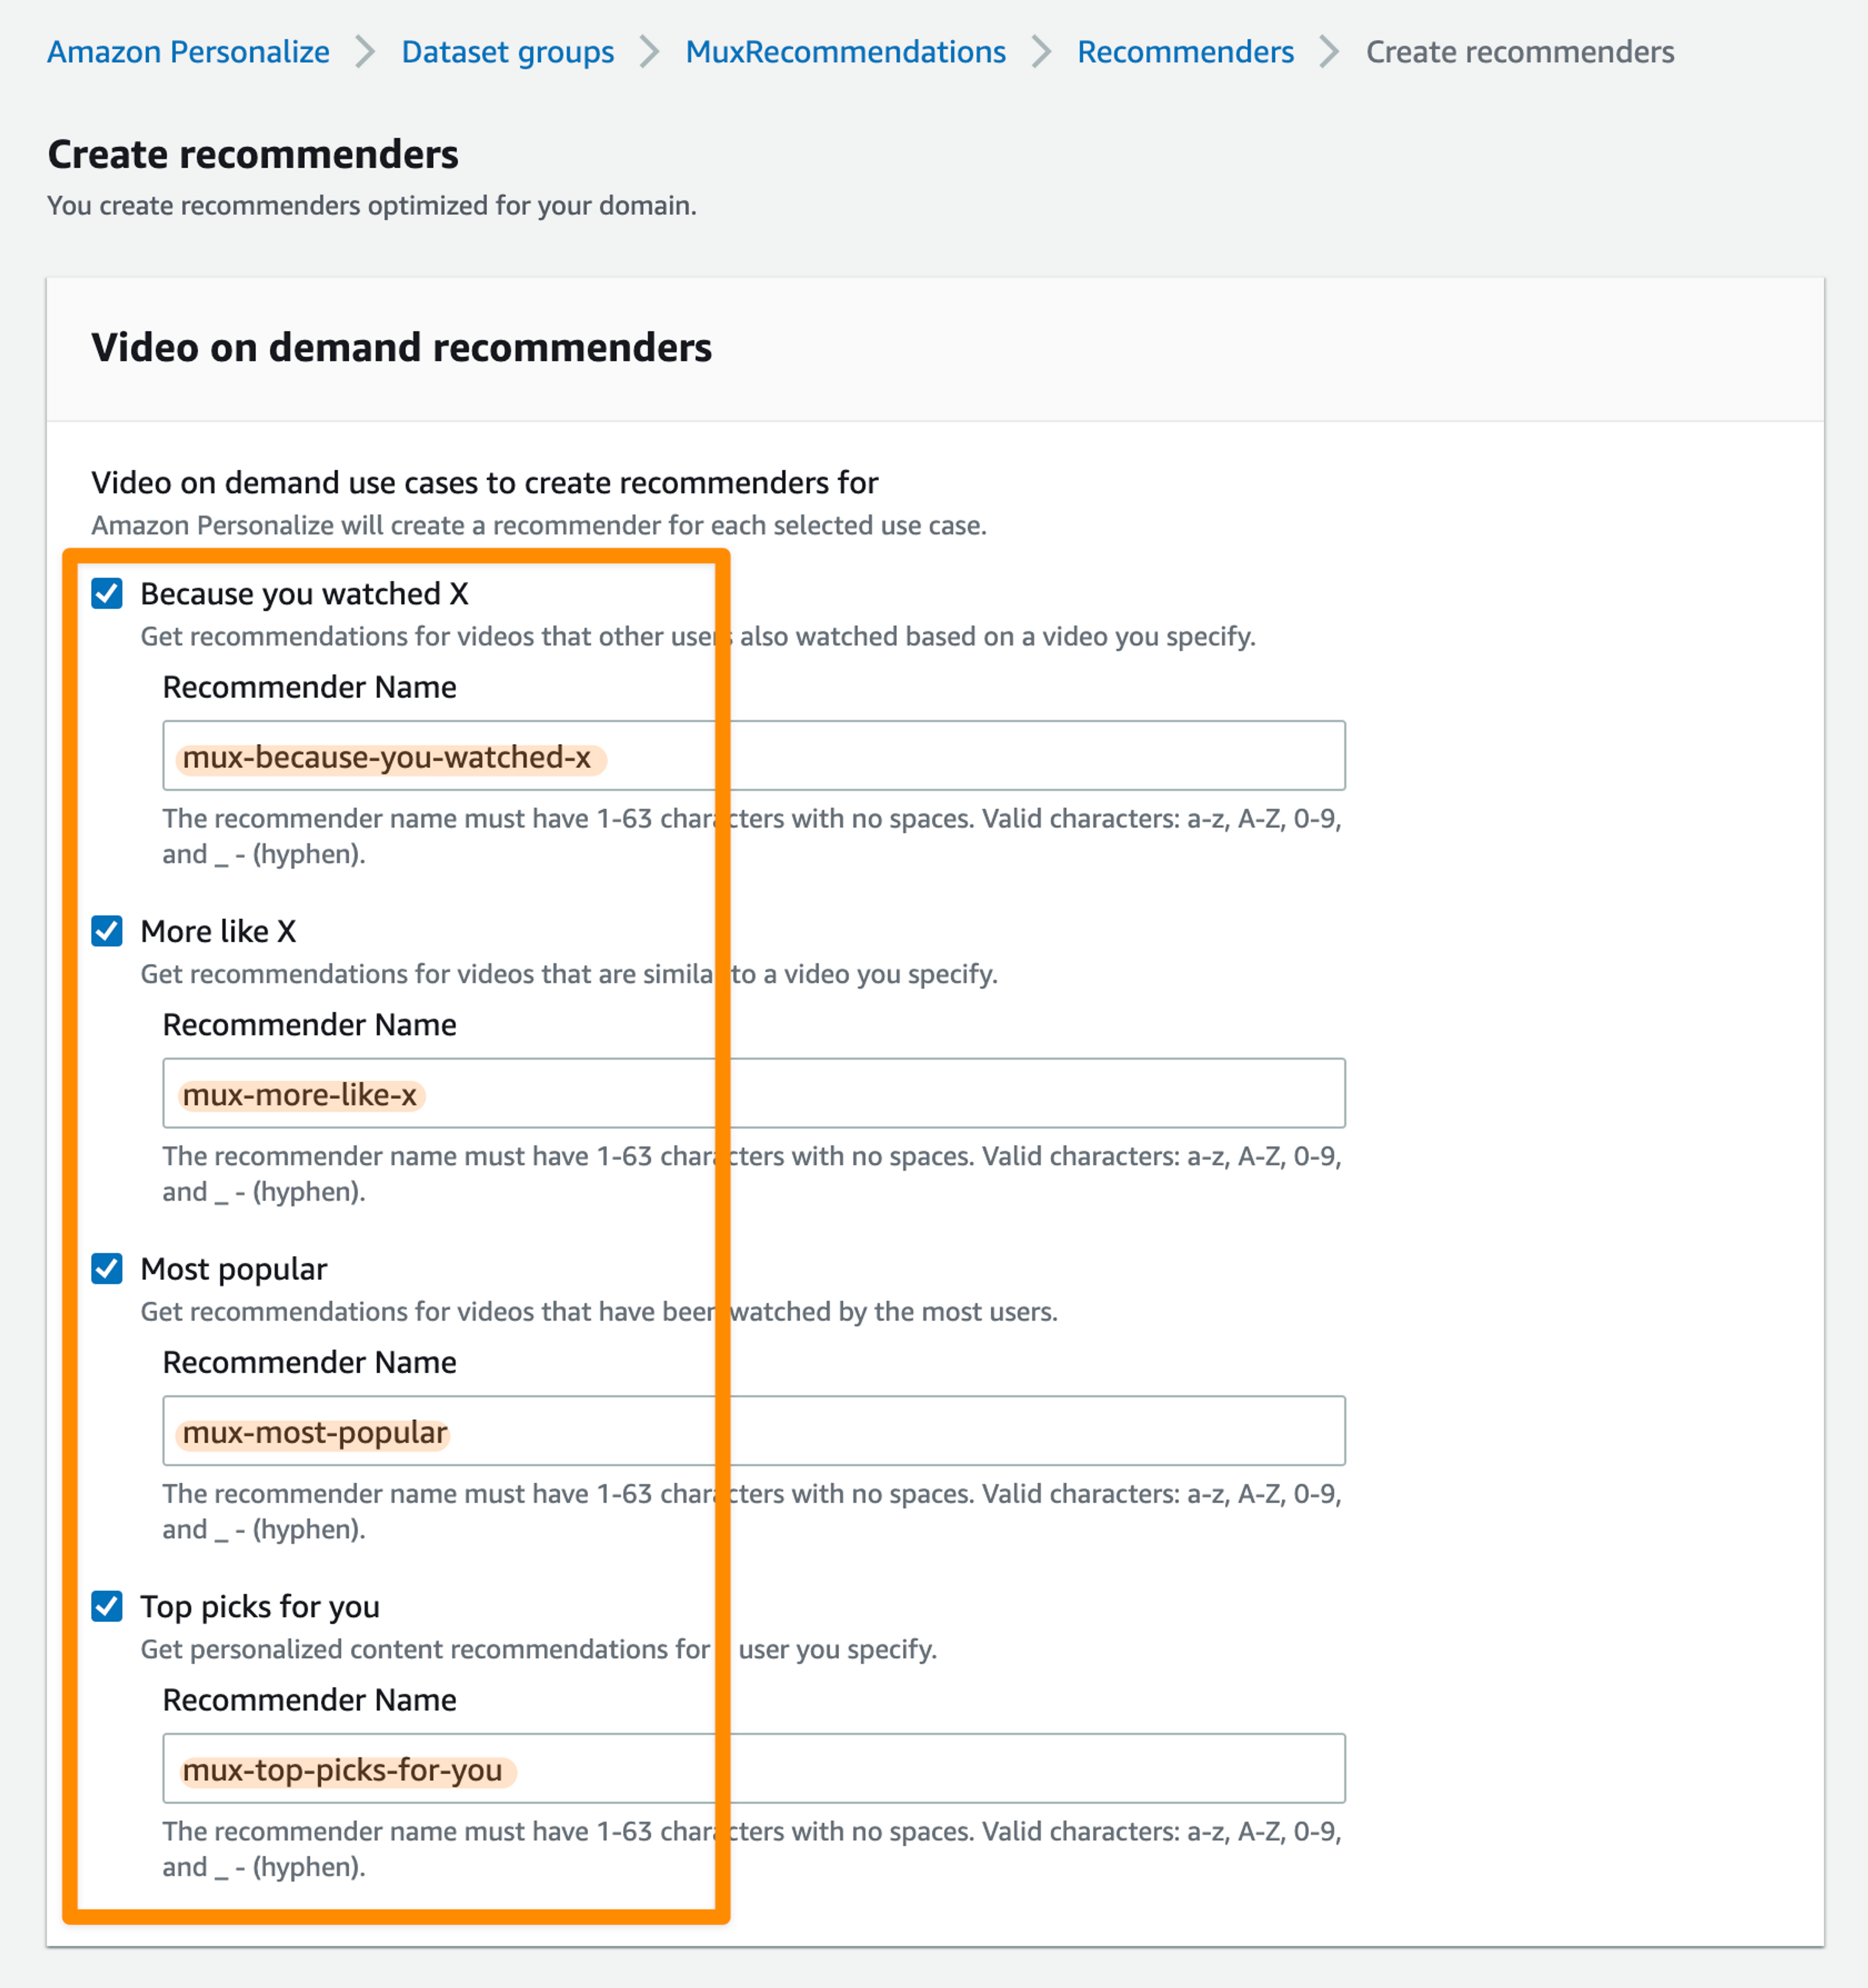 A screenshot of the Amazon Personalize dashboard with fields to create new recommenders with names